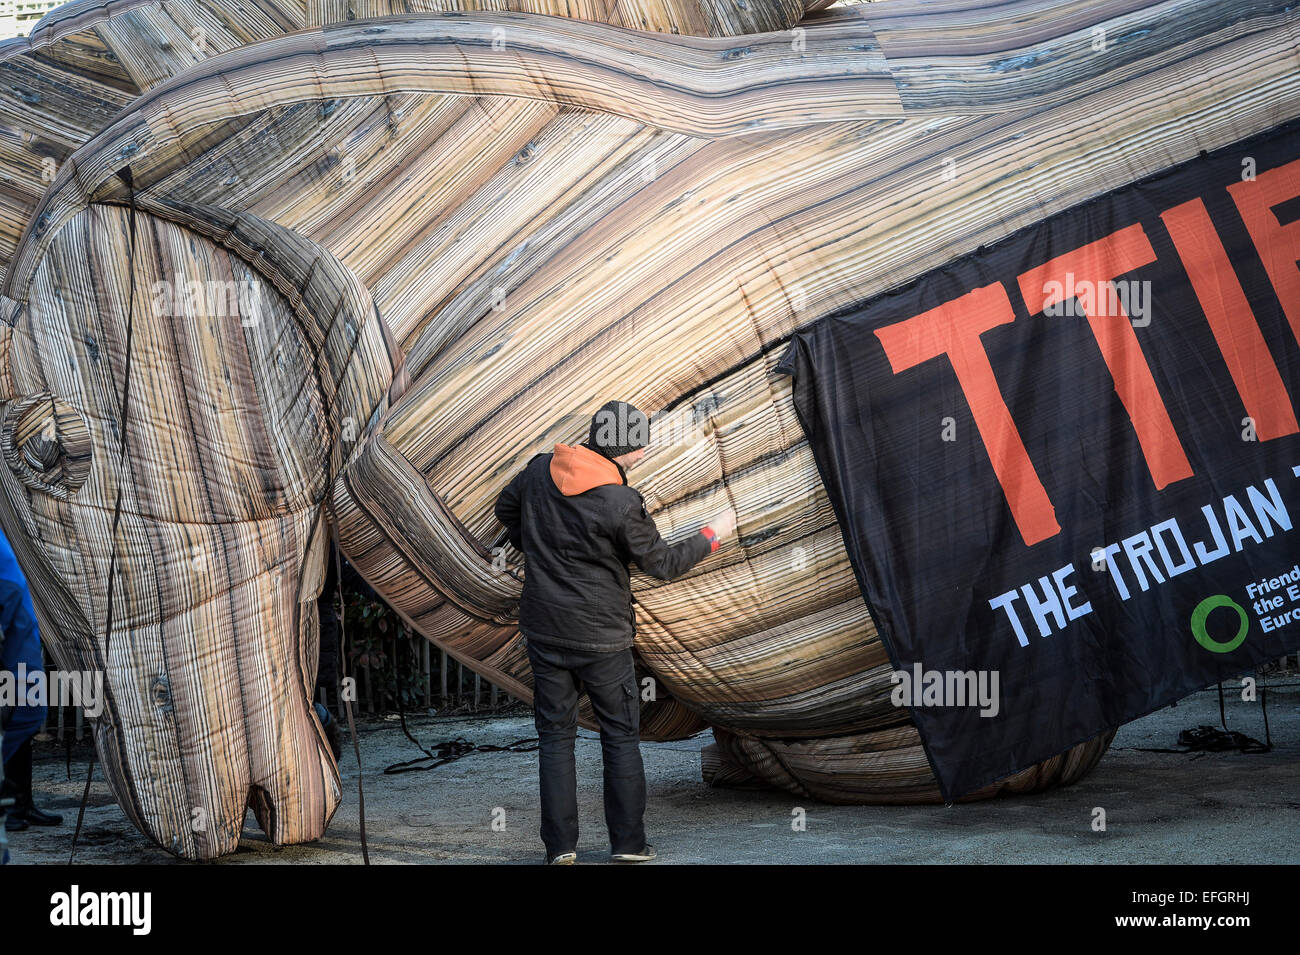 Brussels, Belgium. 04th Feb, 2015. Friends of Earth Europe aet up inflated Trojan horse as they hold the prostest against TTIP agreement in front of EU headquarters in Brussels, Belgium on 04.02.2015 Friends of Earth believe that plans to create more compatible rules between the EU and the US on chemicals, food, public services, workplace health and safety, and financial regulation as part of EU-US trade talks (TTIP) are a threat to democracy and an attempt to put the interests of big business before the protection of citizens, workers, and the environment, according to over 100 civil society  Stock Photo